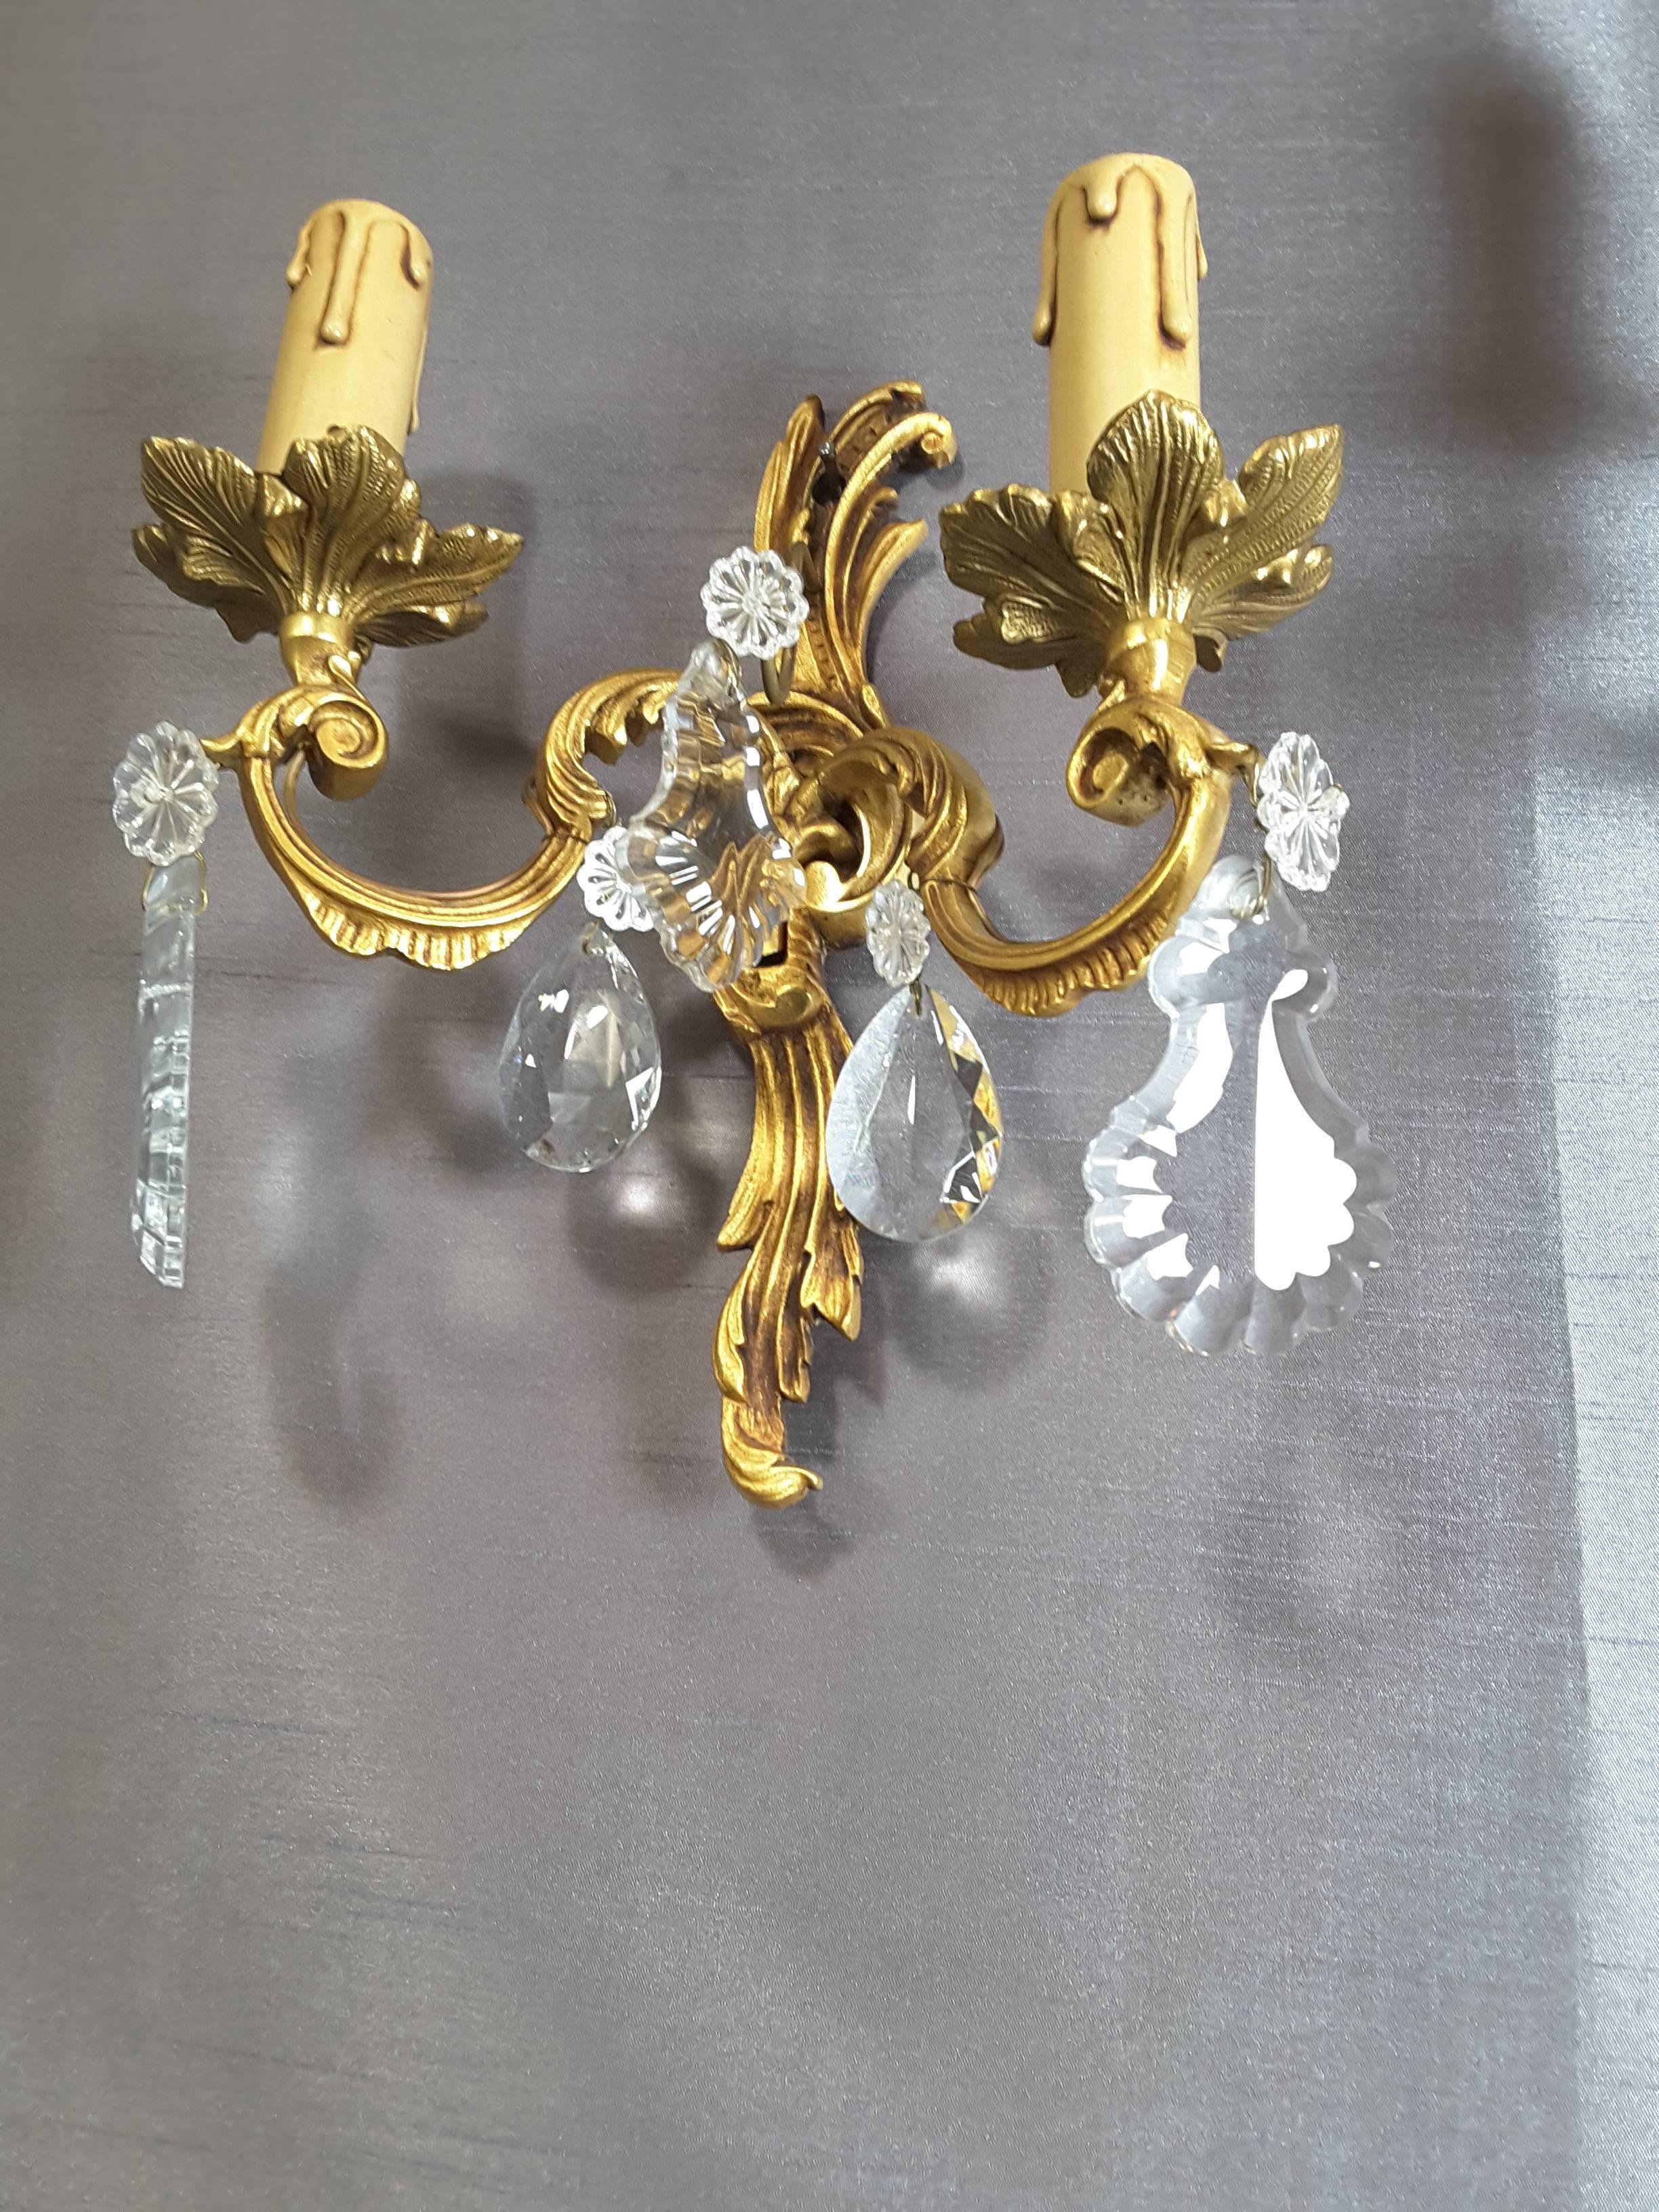 Pair of Brass/Gilt Wall Sconces with Floral Crystals 1